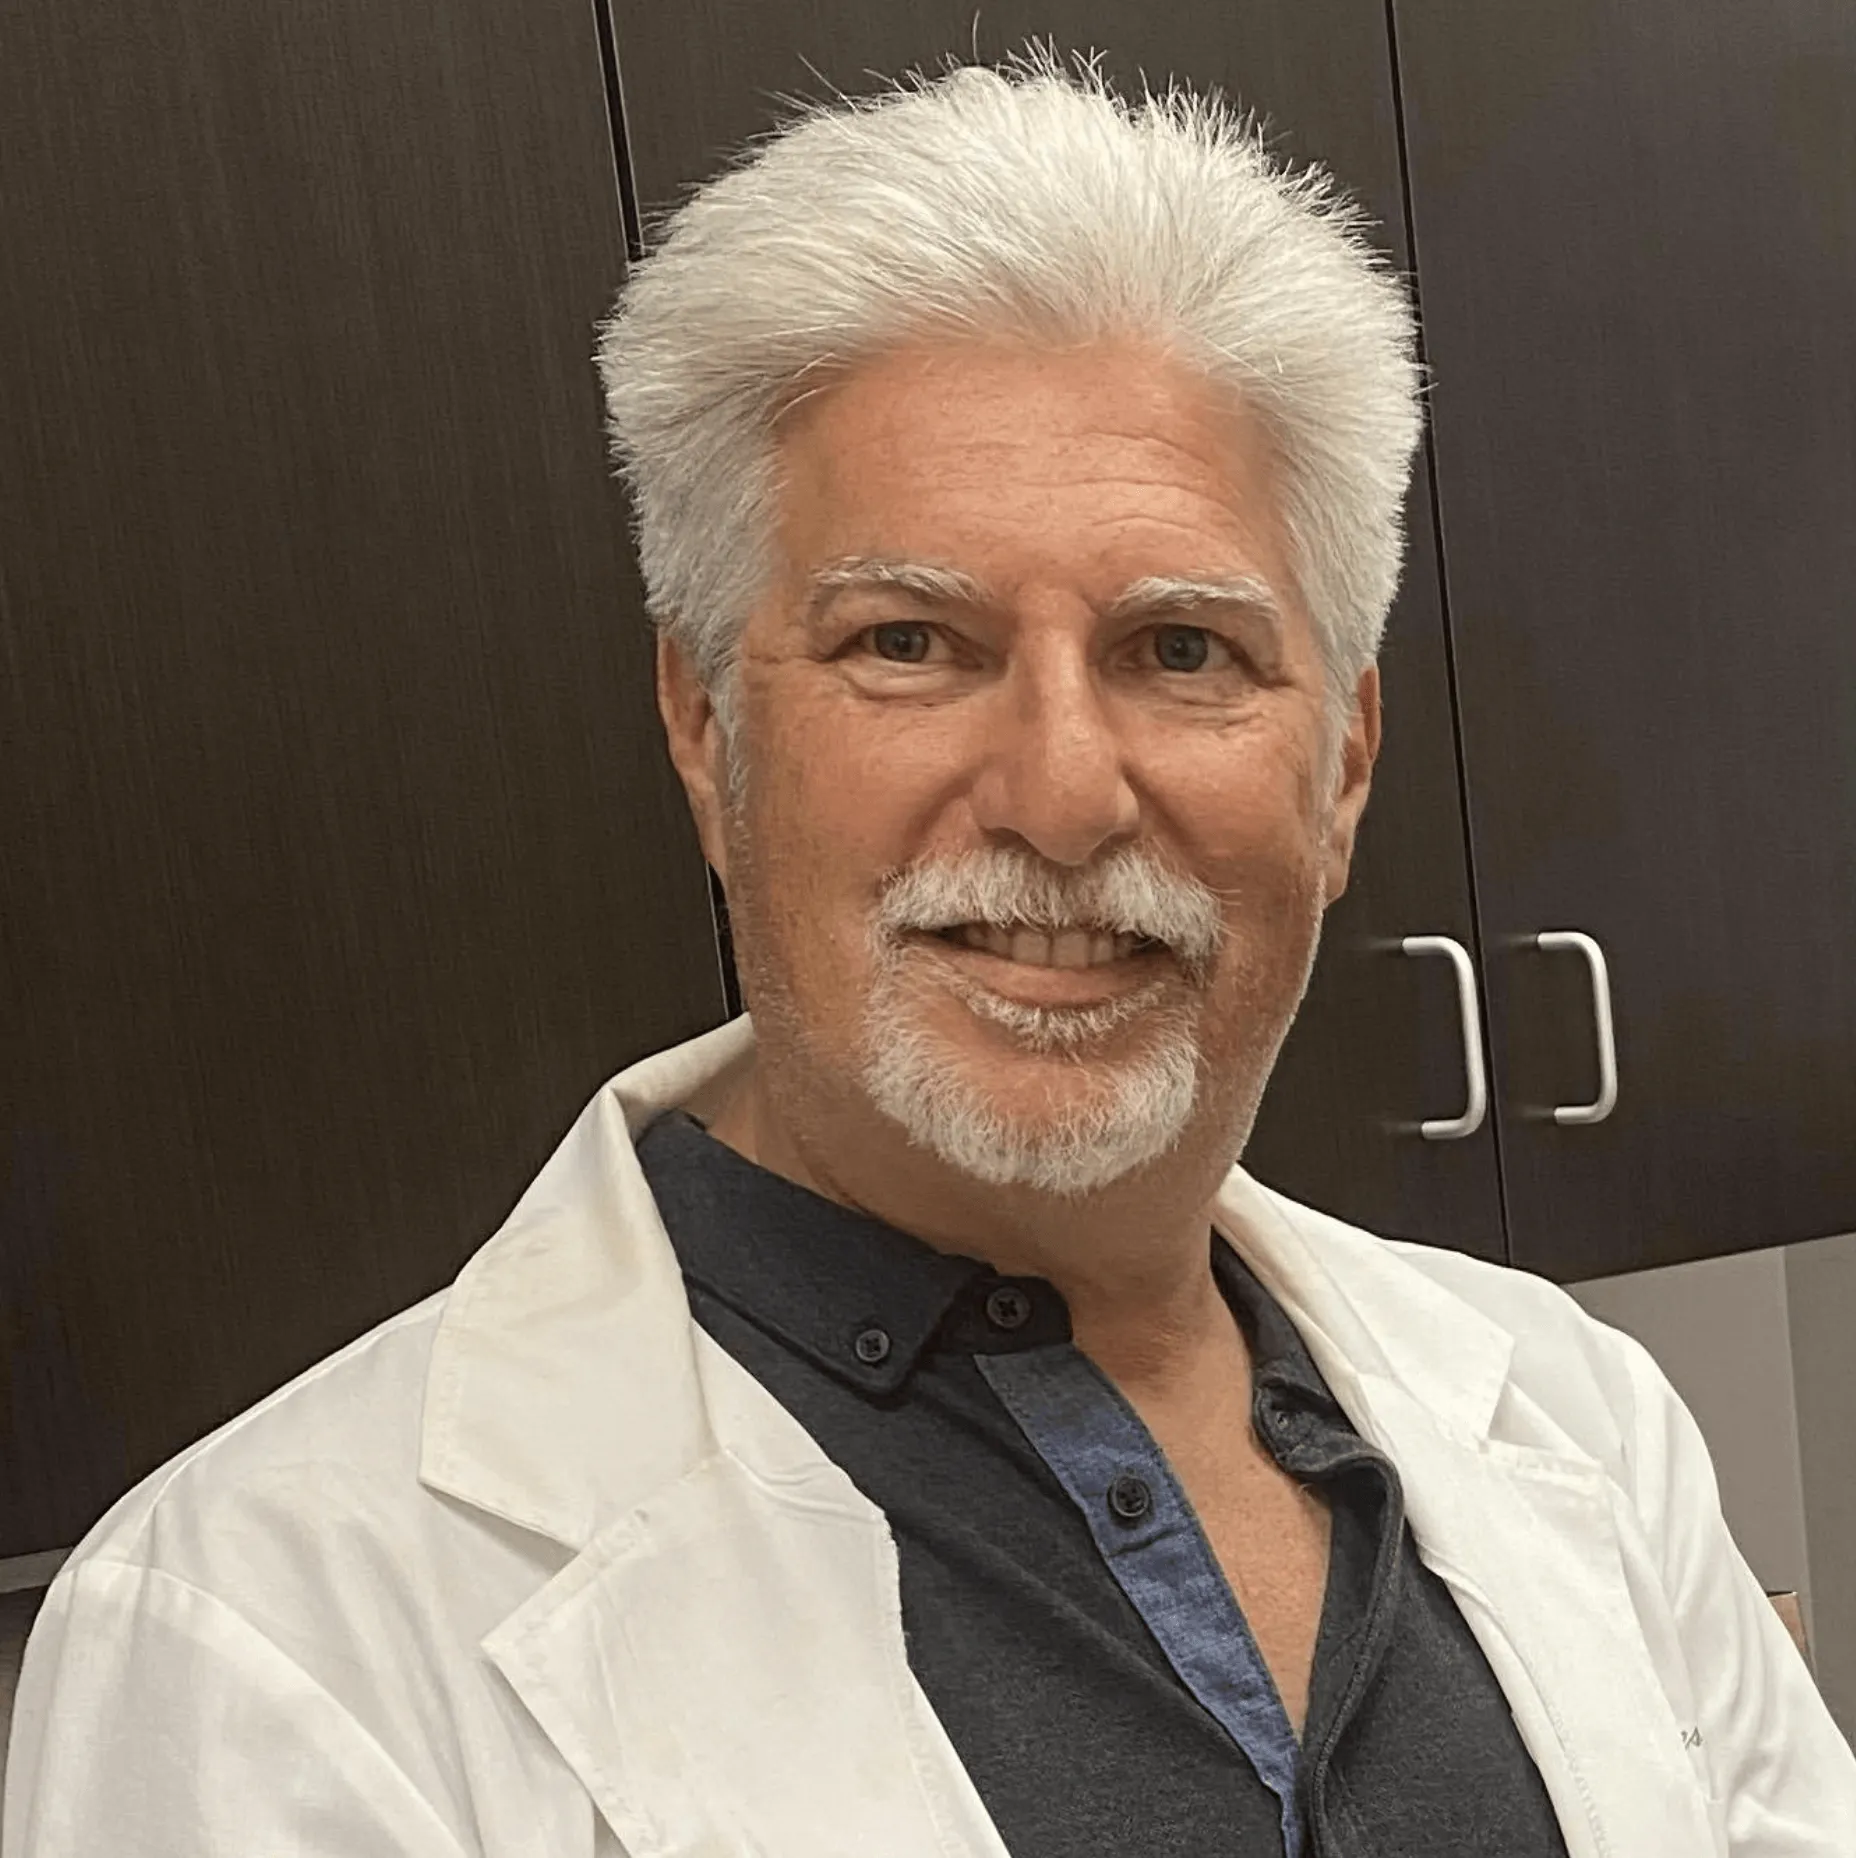 a man with white hair and a beard wearing a lab coat